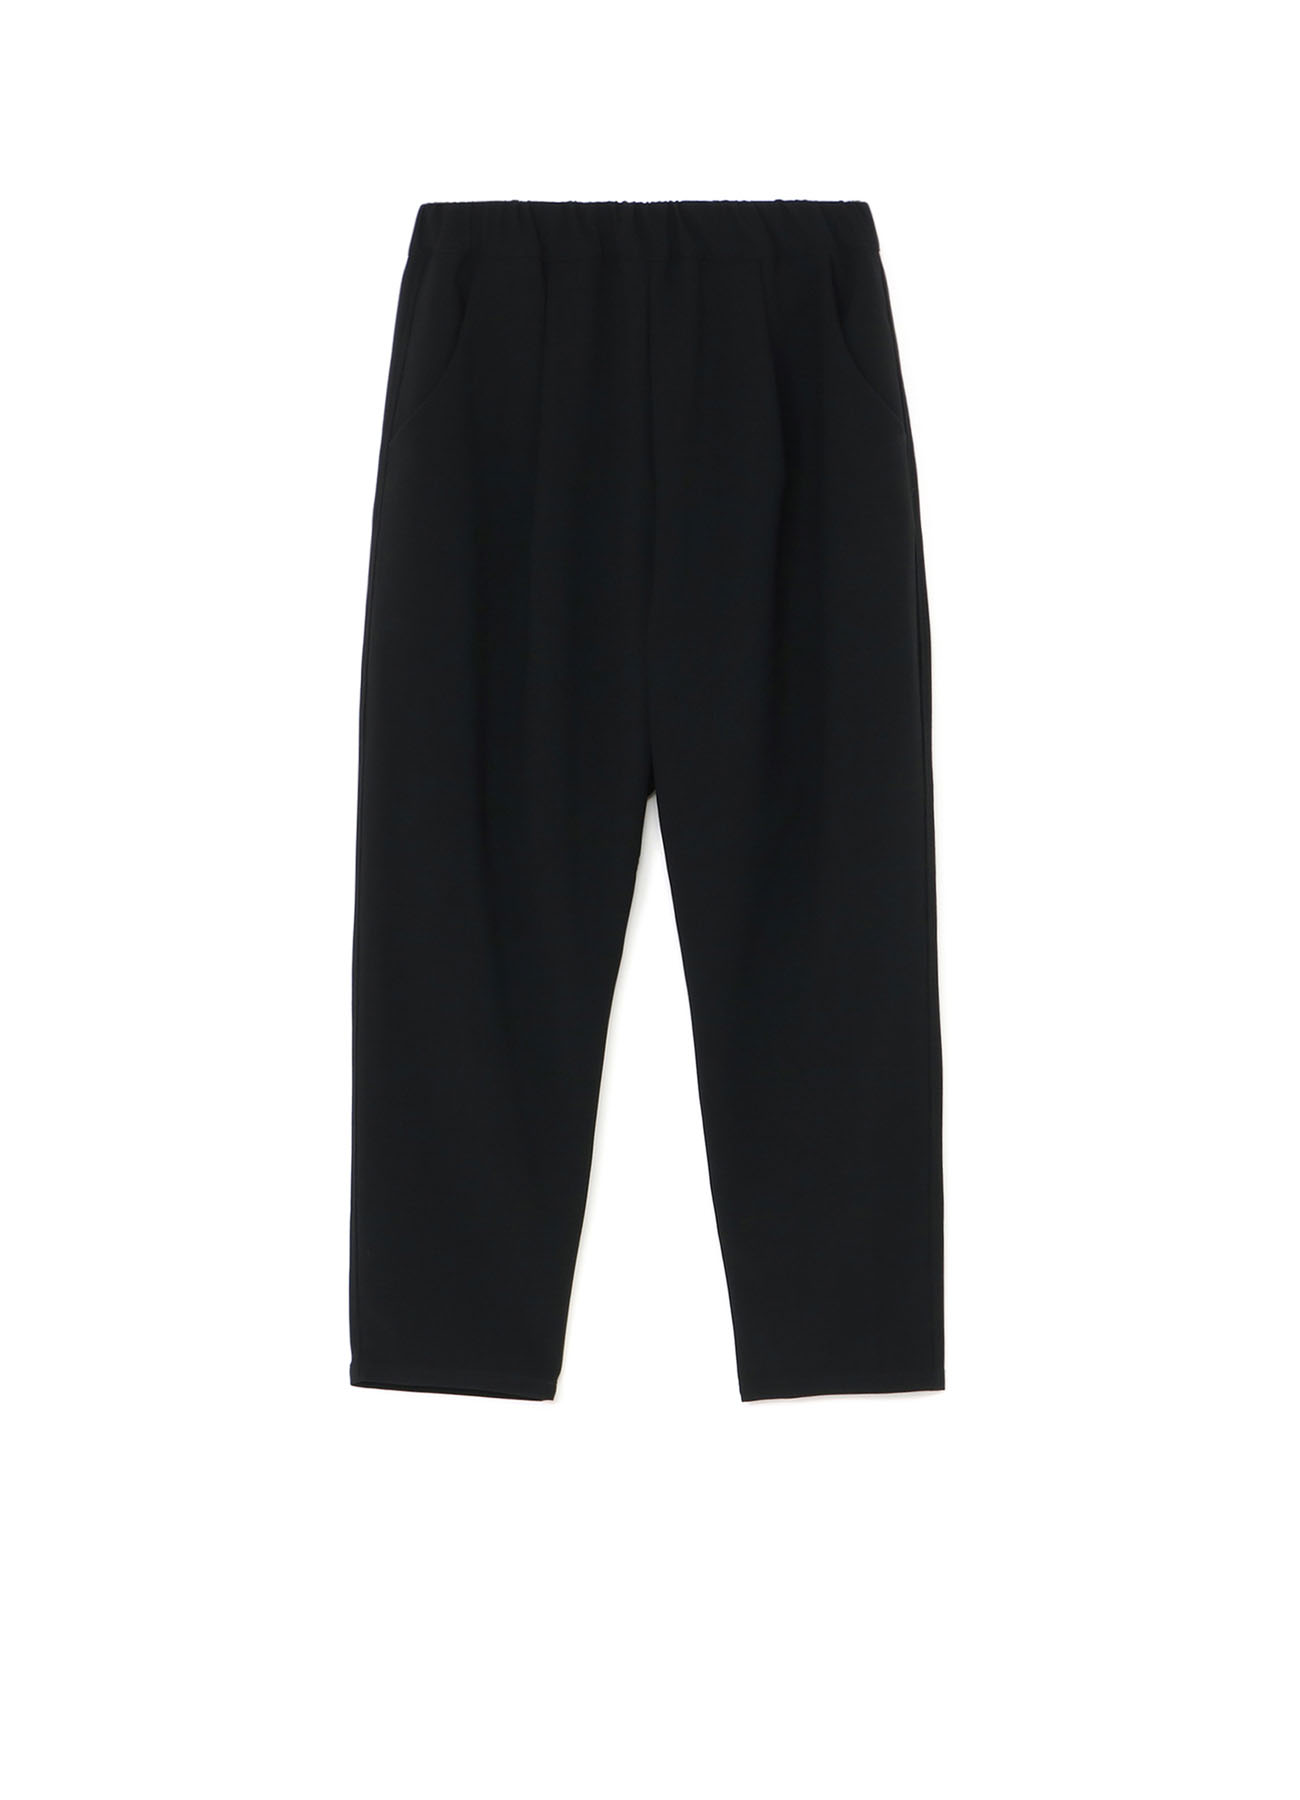 STRETCH DOUBLE WEAVE TUCK PANTS